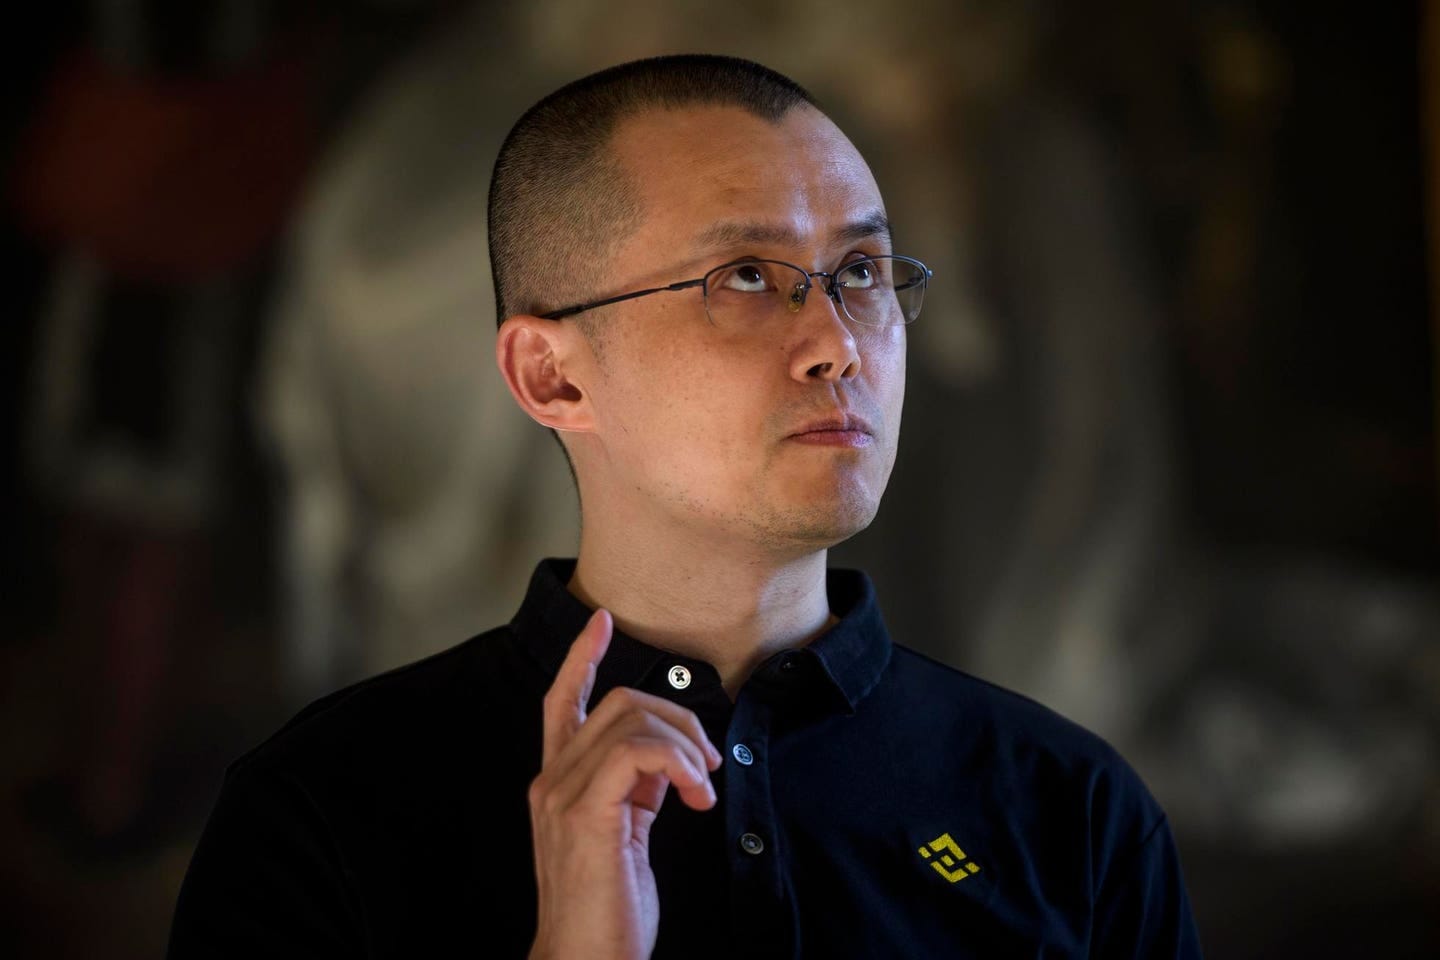 Founder and CEO of Binance Changpeng Zhao, commonly known as "CZ", attends the "CZ 